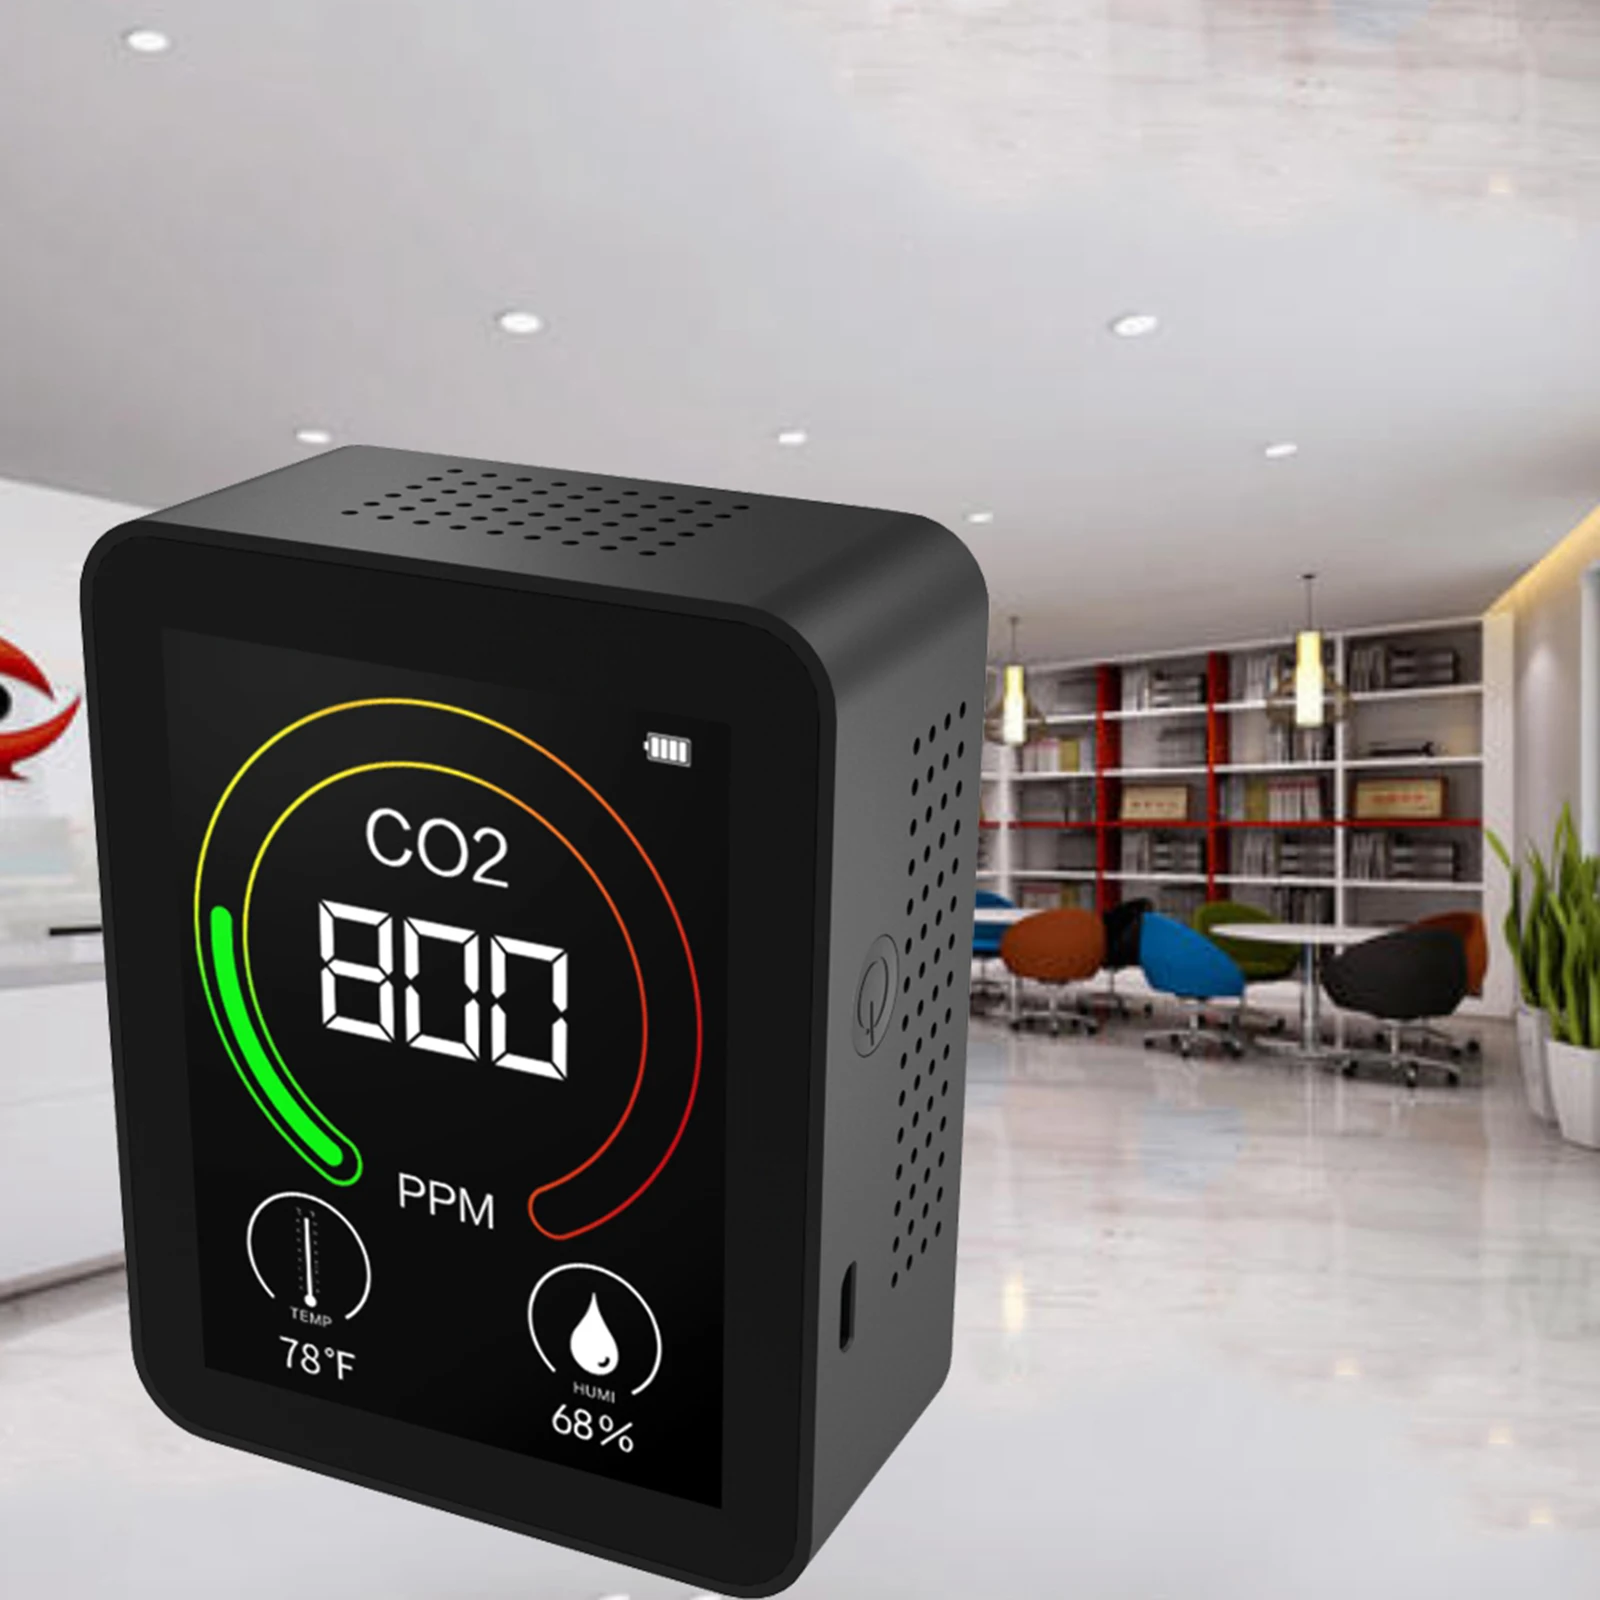 Indoor CO2 Measure for Home Offices Temperature and Humidity Real Time Display, Carbon Dioxide Detector